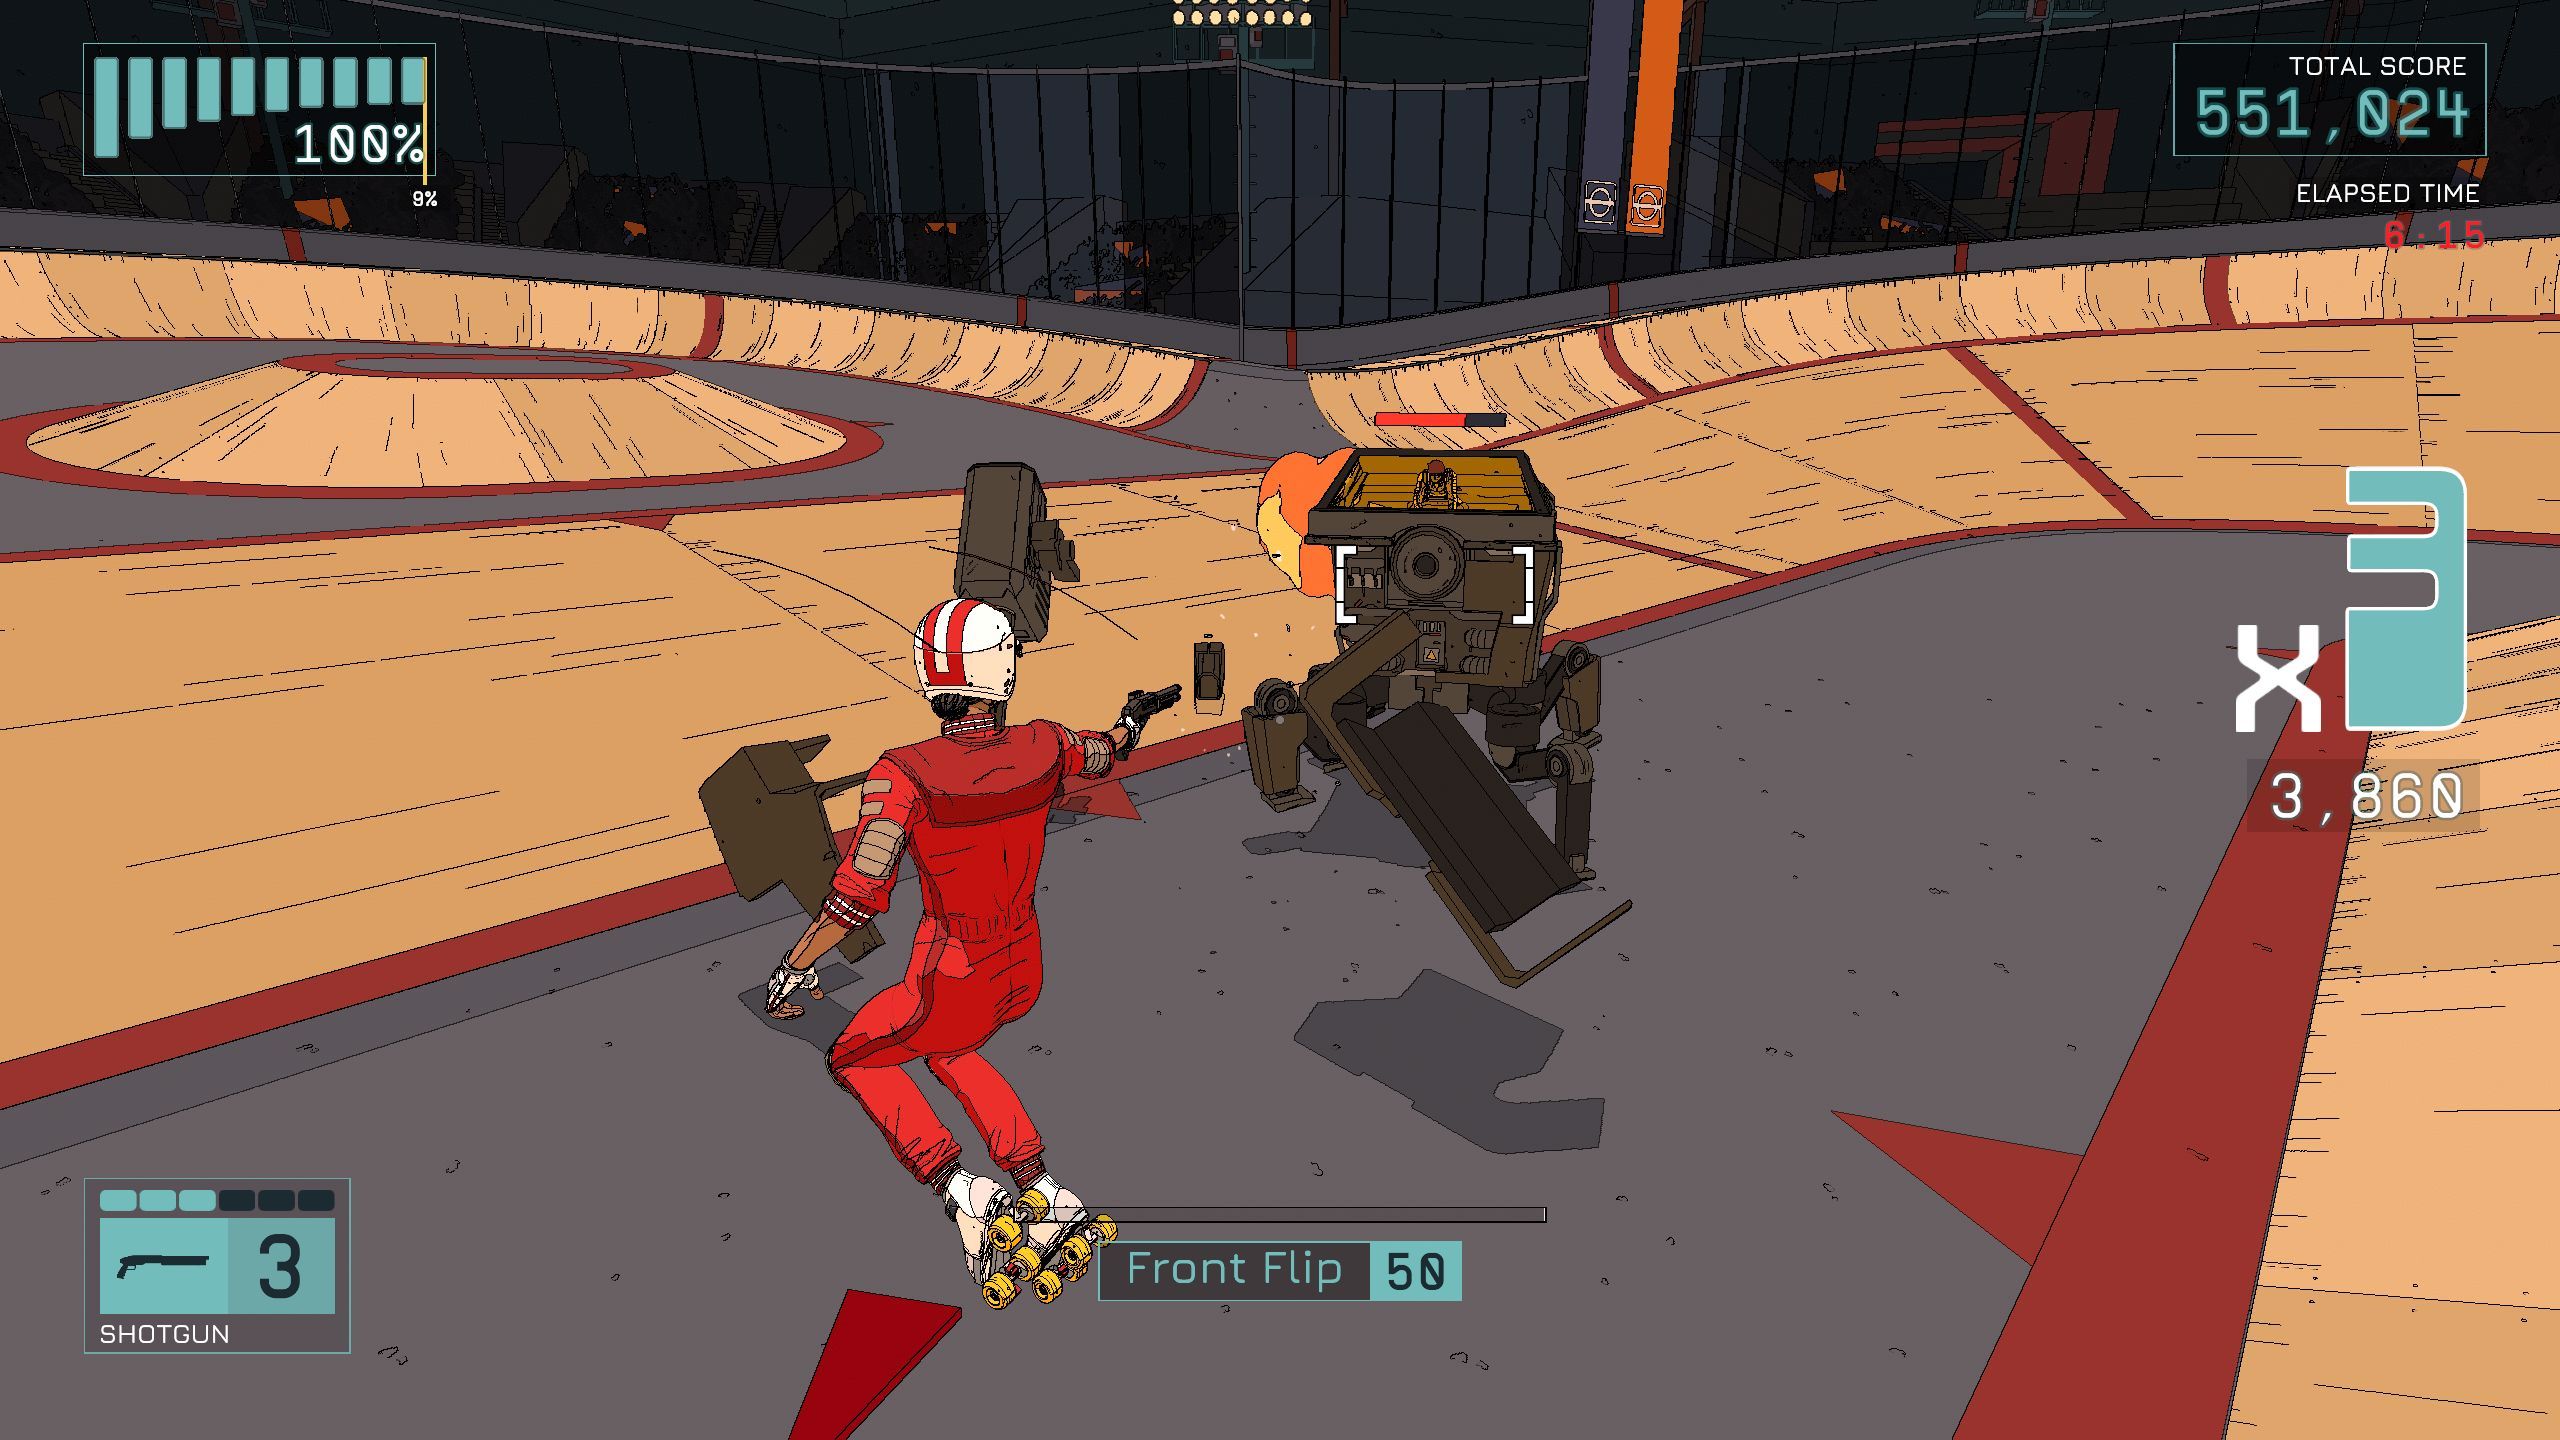 A woman in a red jump suit fires a gun in the air at a robot sentry in a rollerdrome